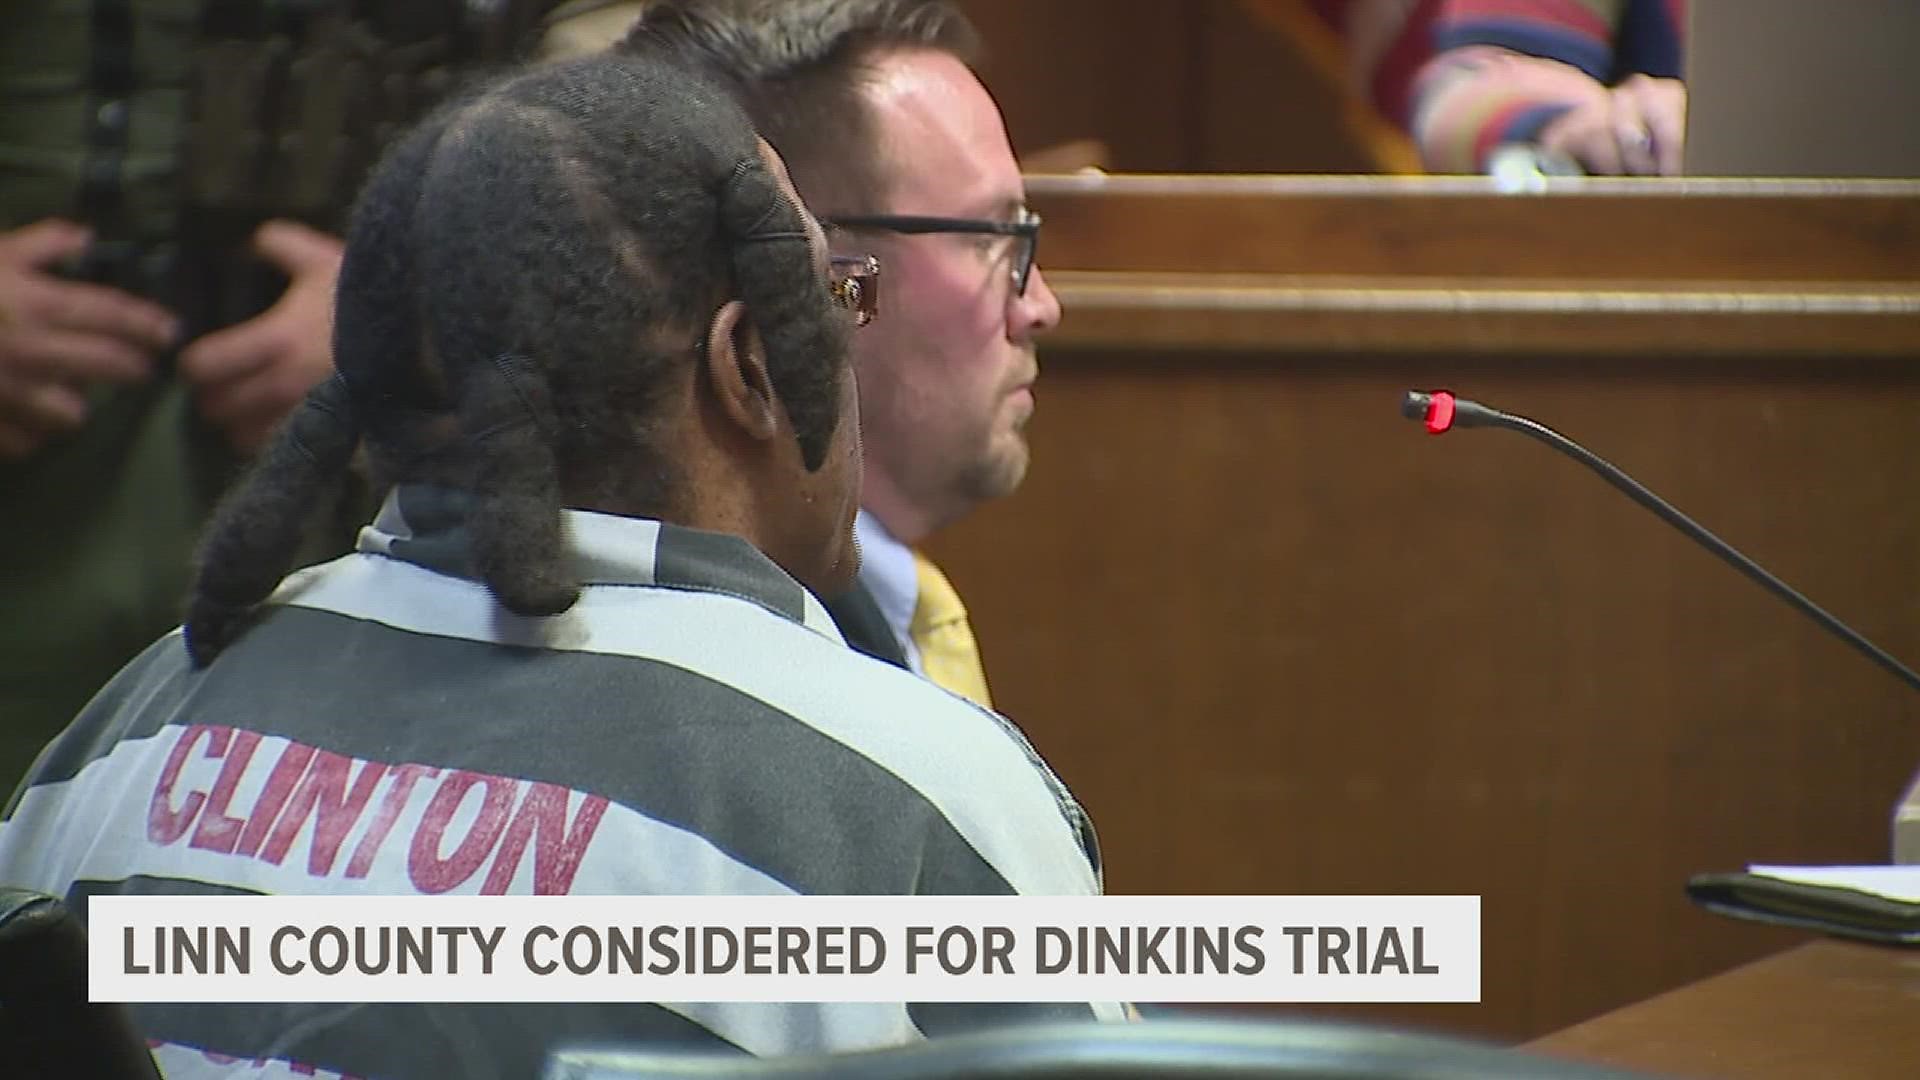 A hearing is scheduled for April 28 to make the final decision of where Henry Dinkins' trial will happen, according to court documents.